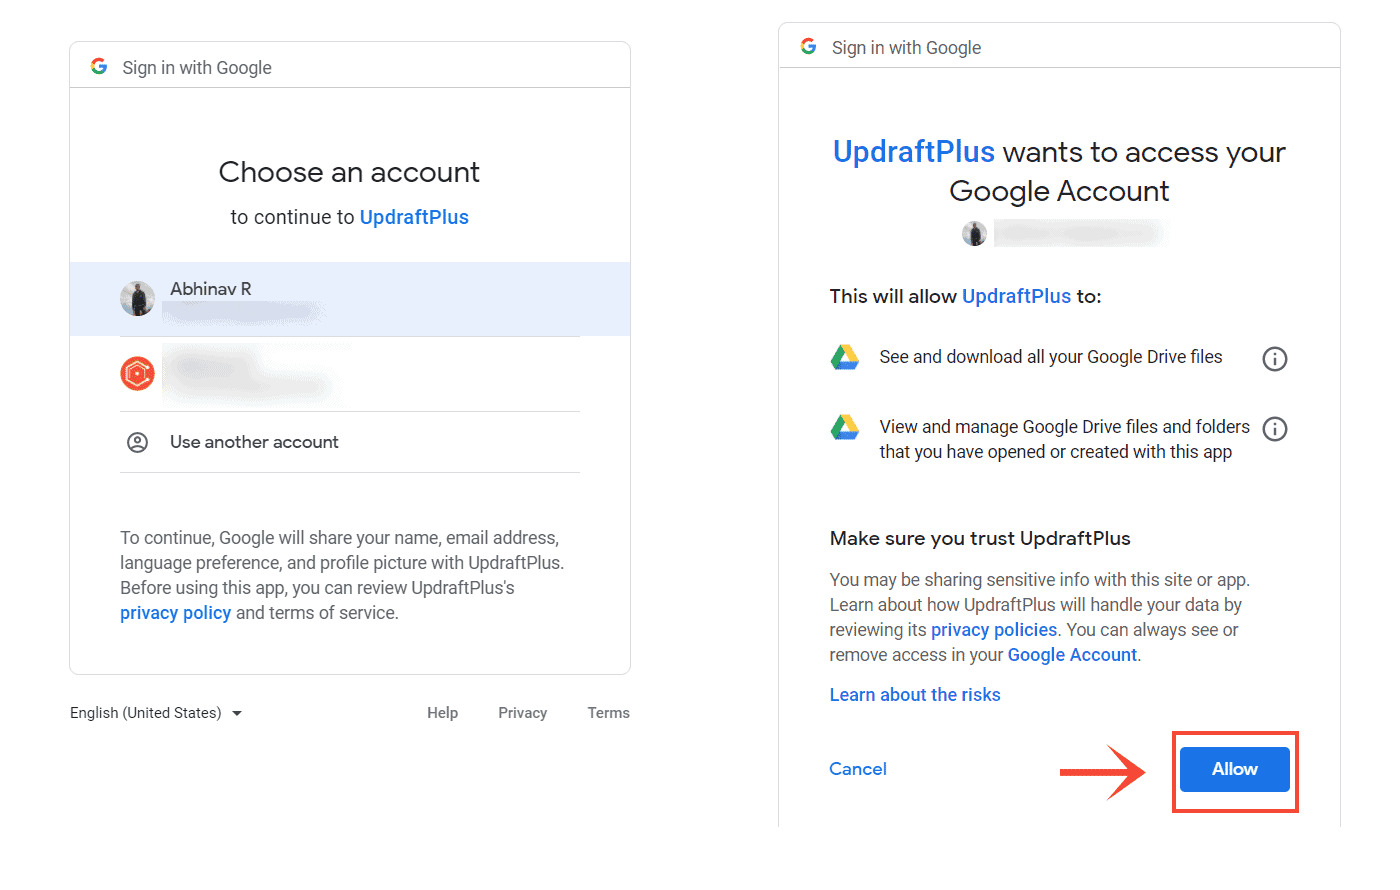 giving updraftplus access to Google Drive